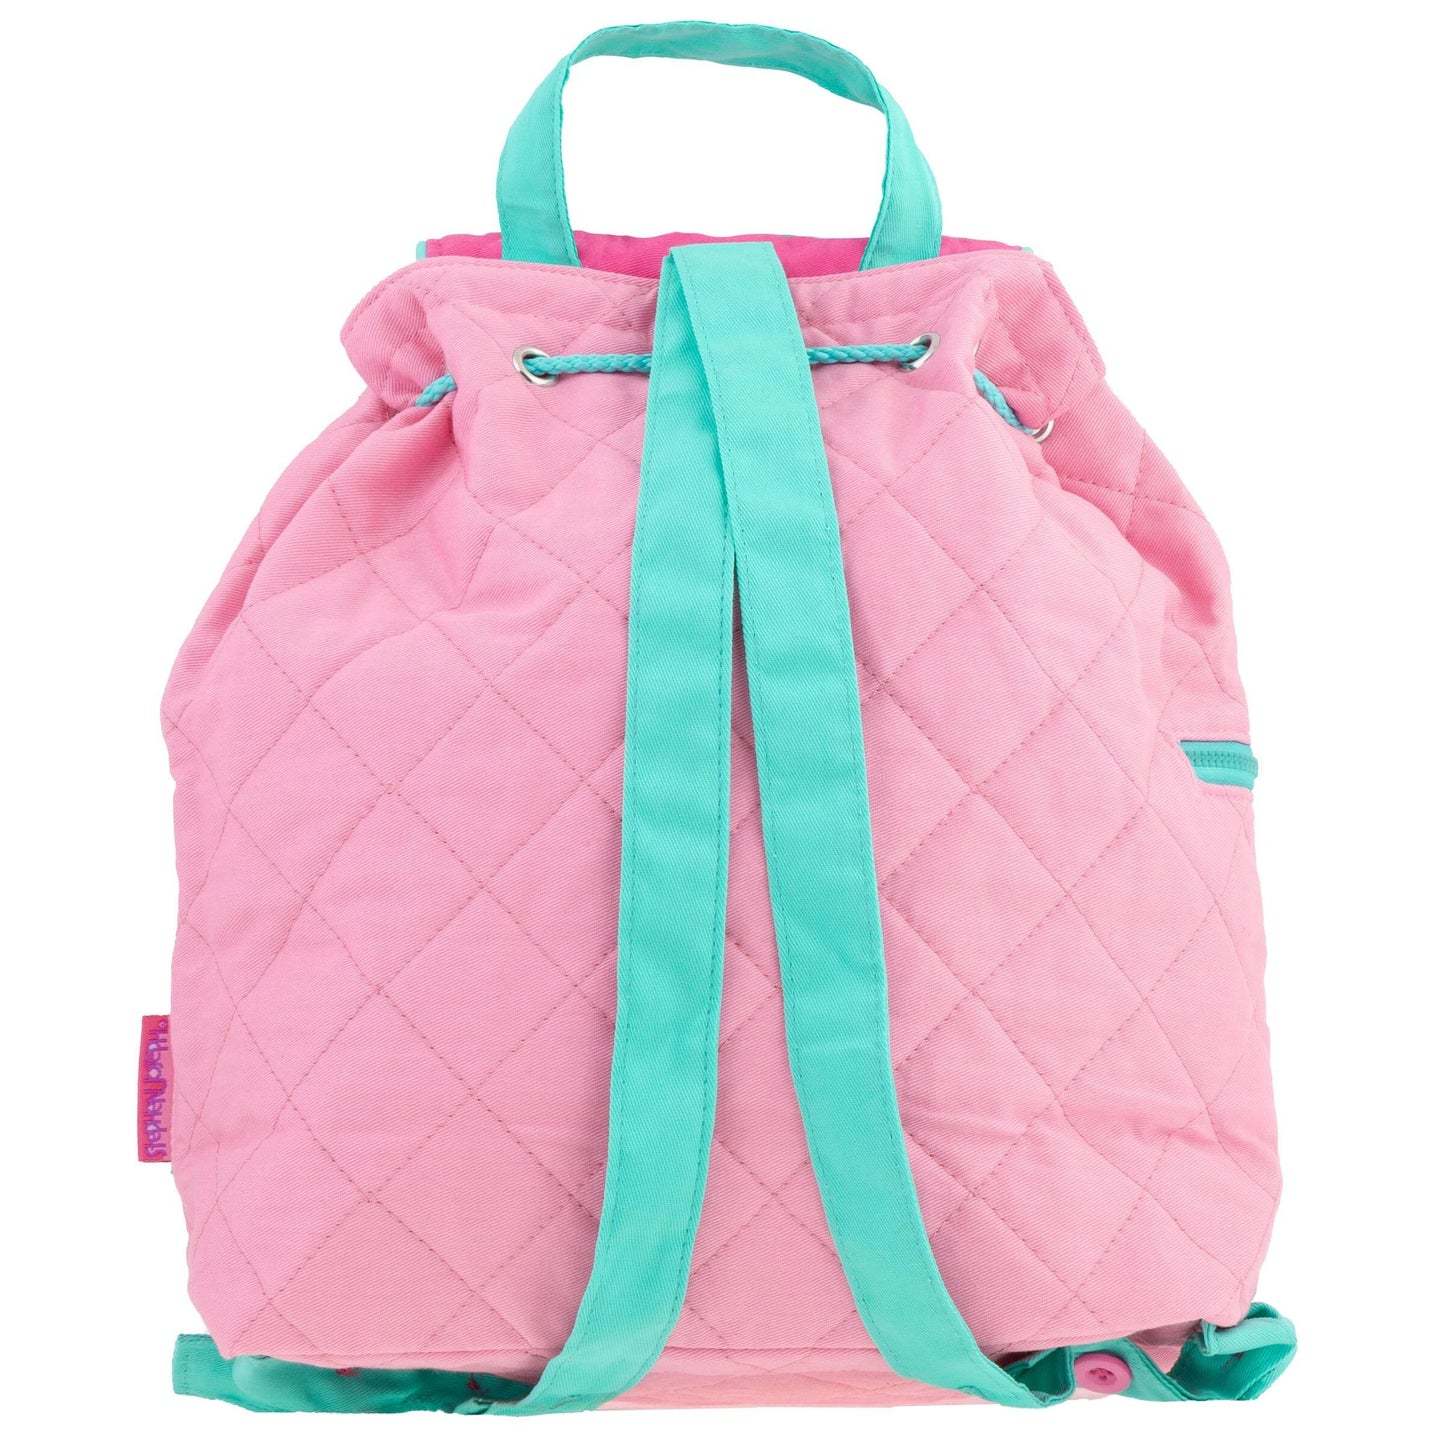 Stephen Joseph Quilted Backpack